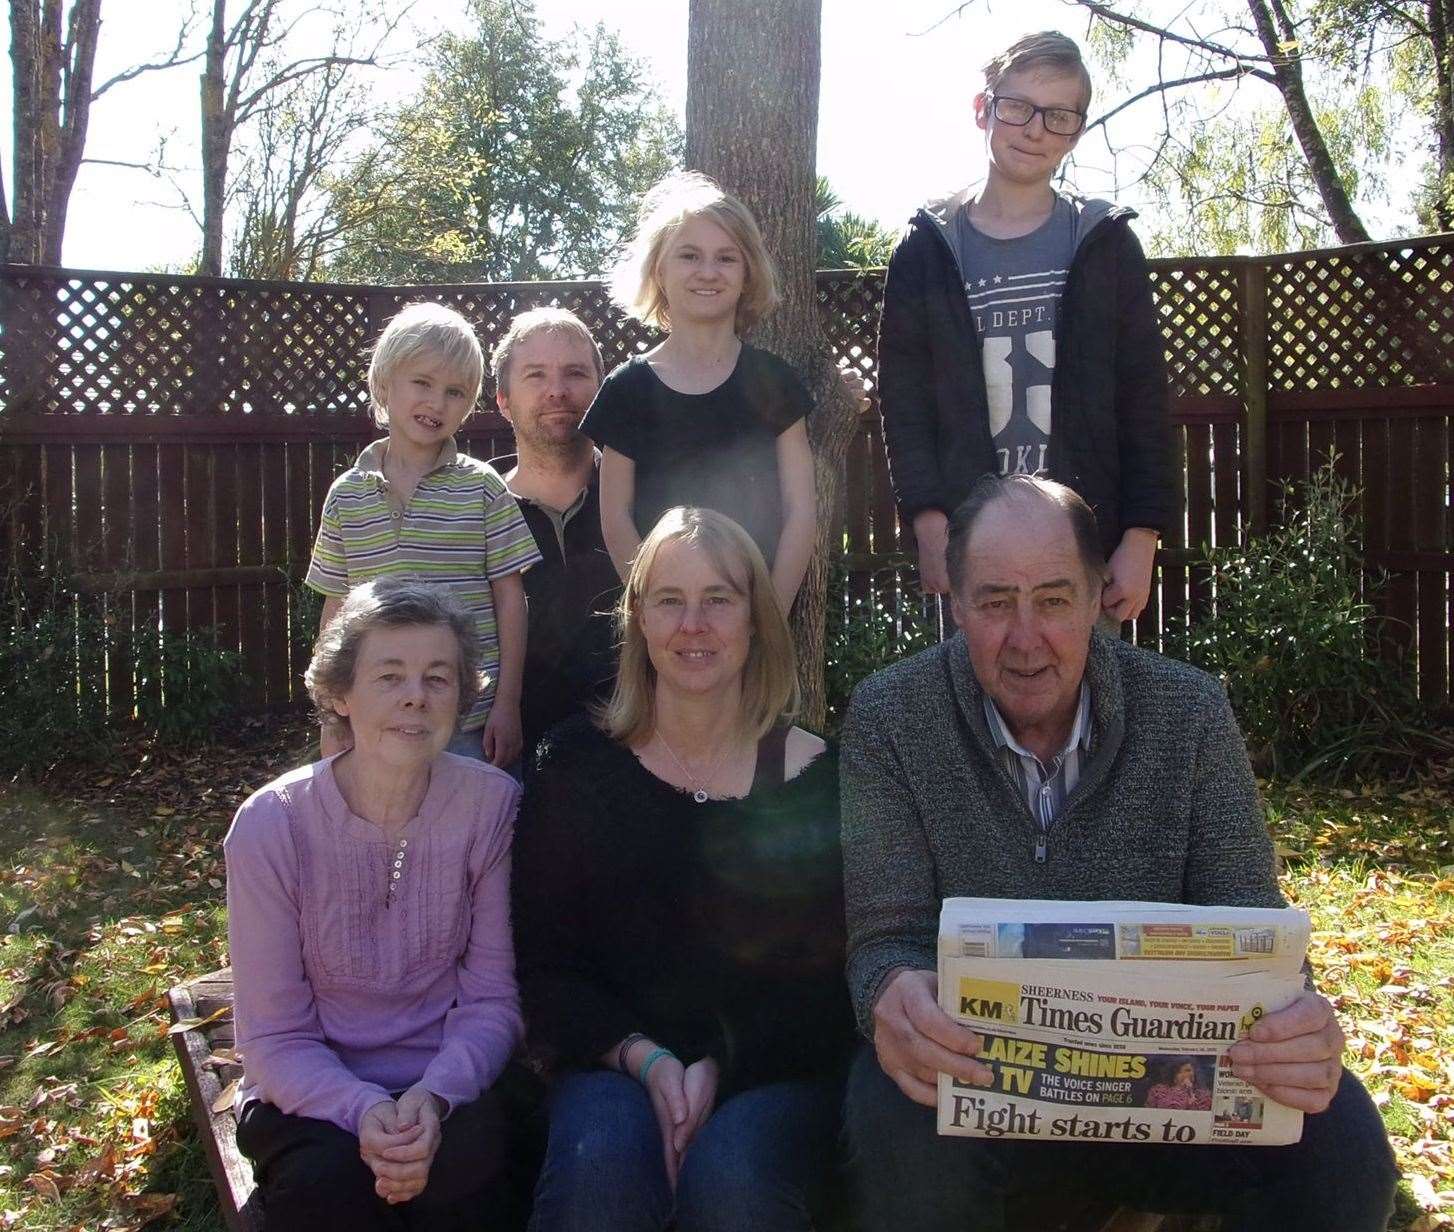 Robert Dawson from Sheppey and his family stranded in New Zealand because of the coronavirus clampdown